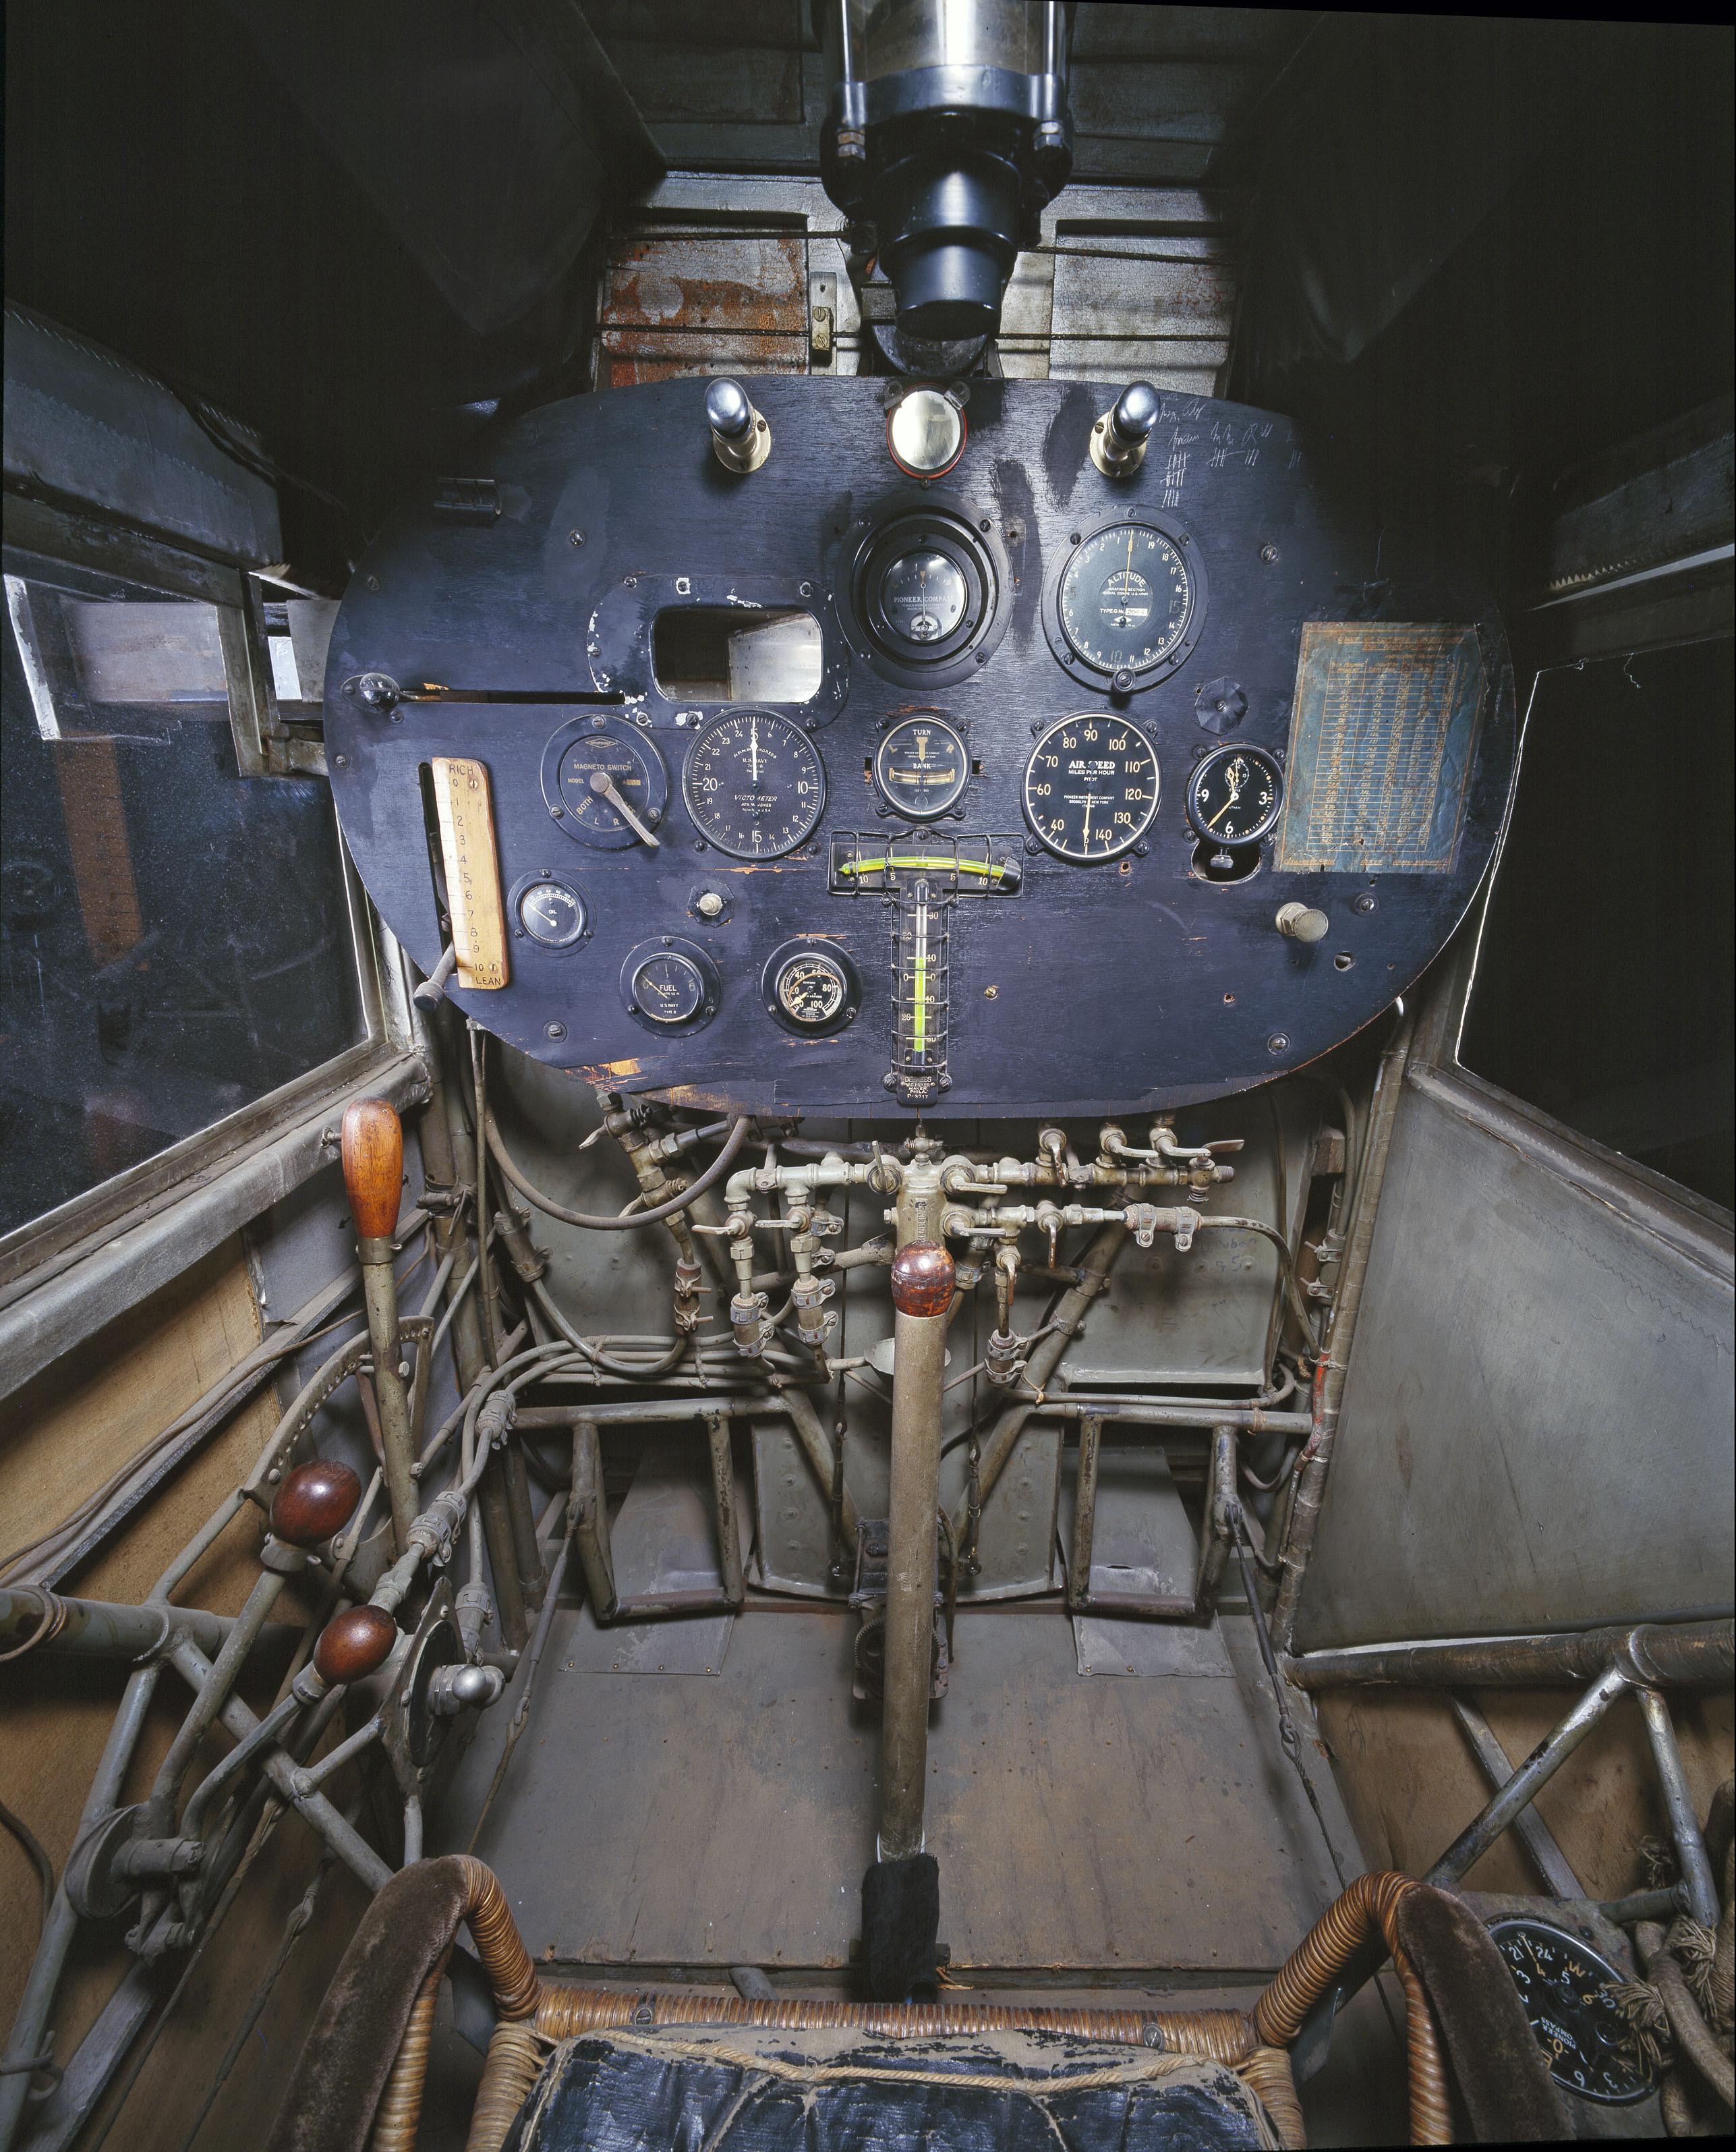 This is the cockpit of the first aircraft to make a non-stop transatlantic flight, the Spirit of Saint Louis. Note the periscope in lieu of a forward window.